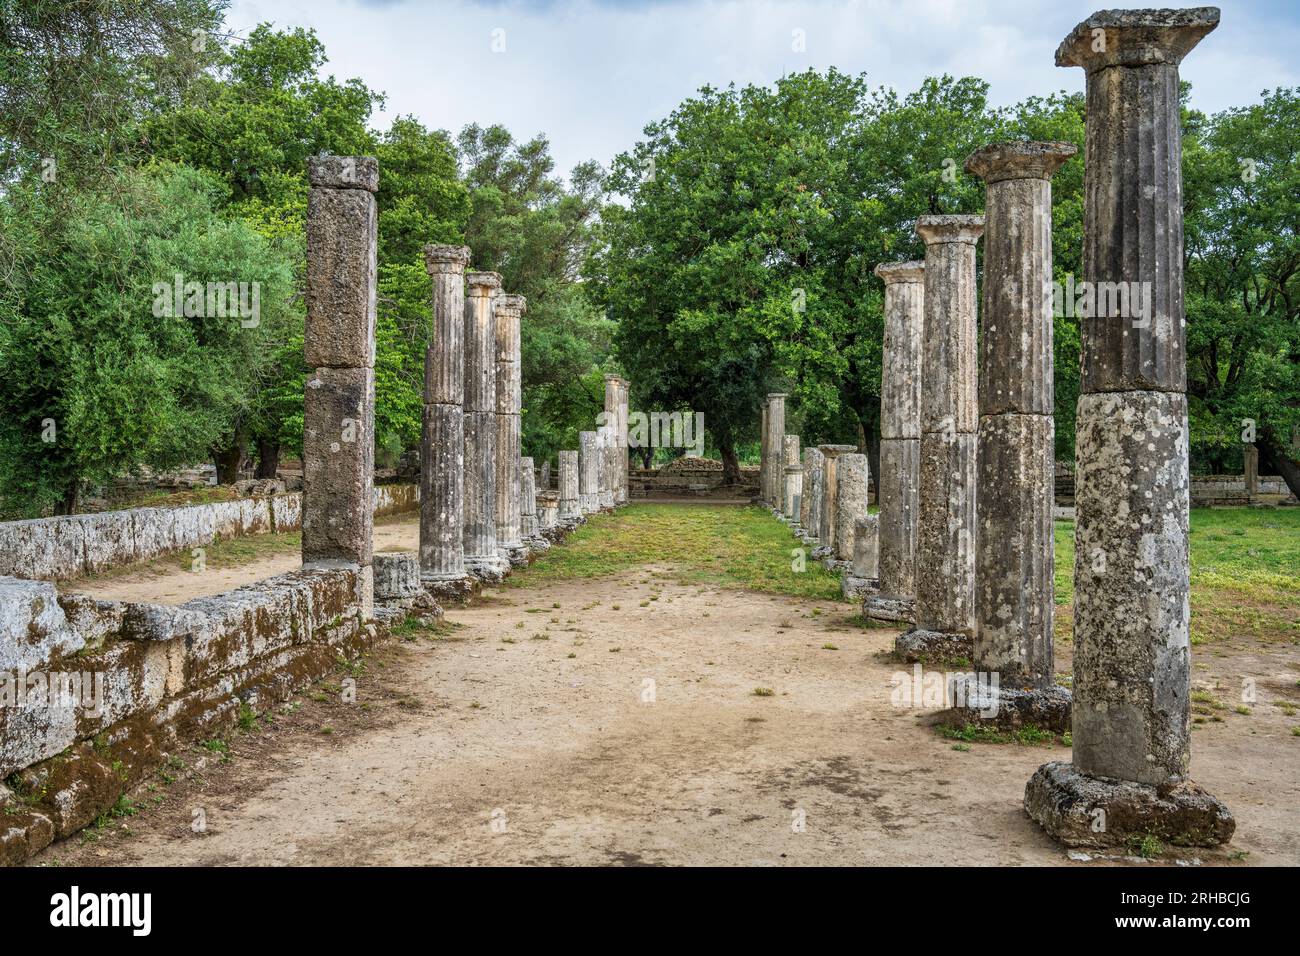 The ruins of the Palaestra (wrestling grounds) at ancient Olympia, birthplace of the Olympic Games, in Elis, Peloponnese, Greece Stock Photo